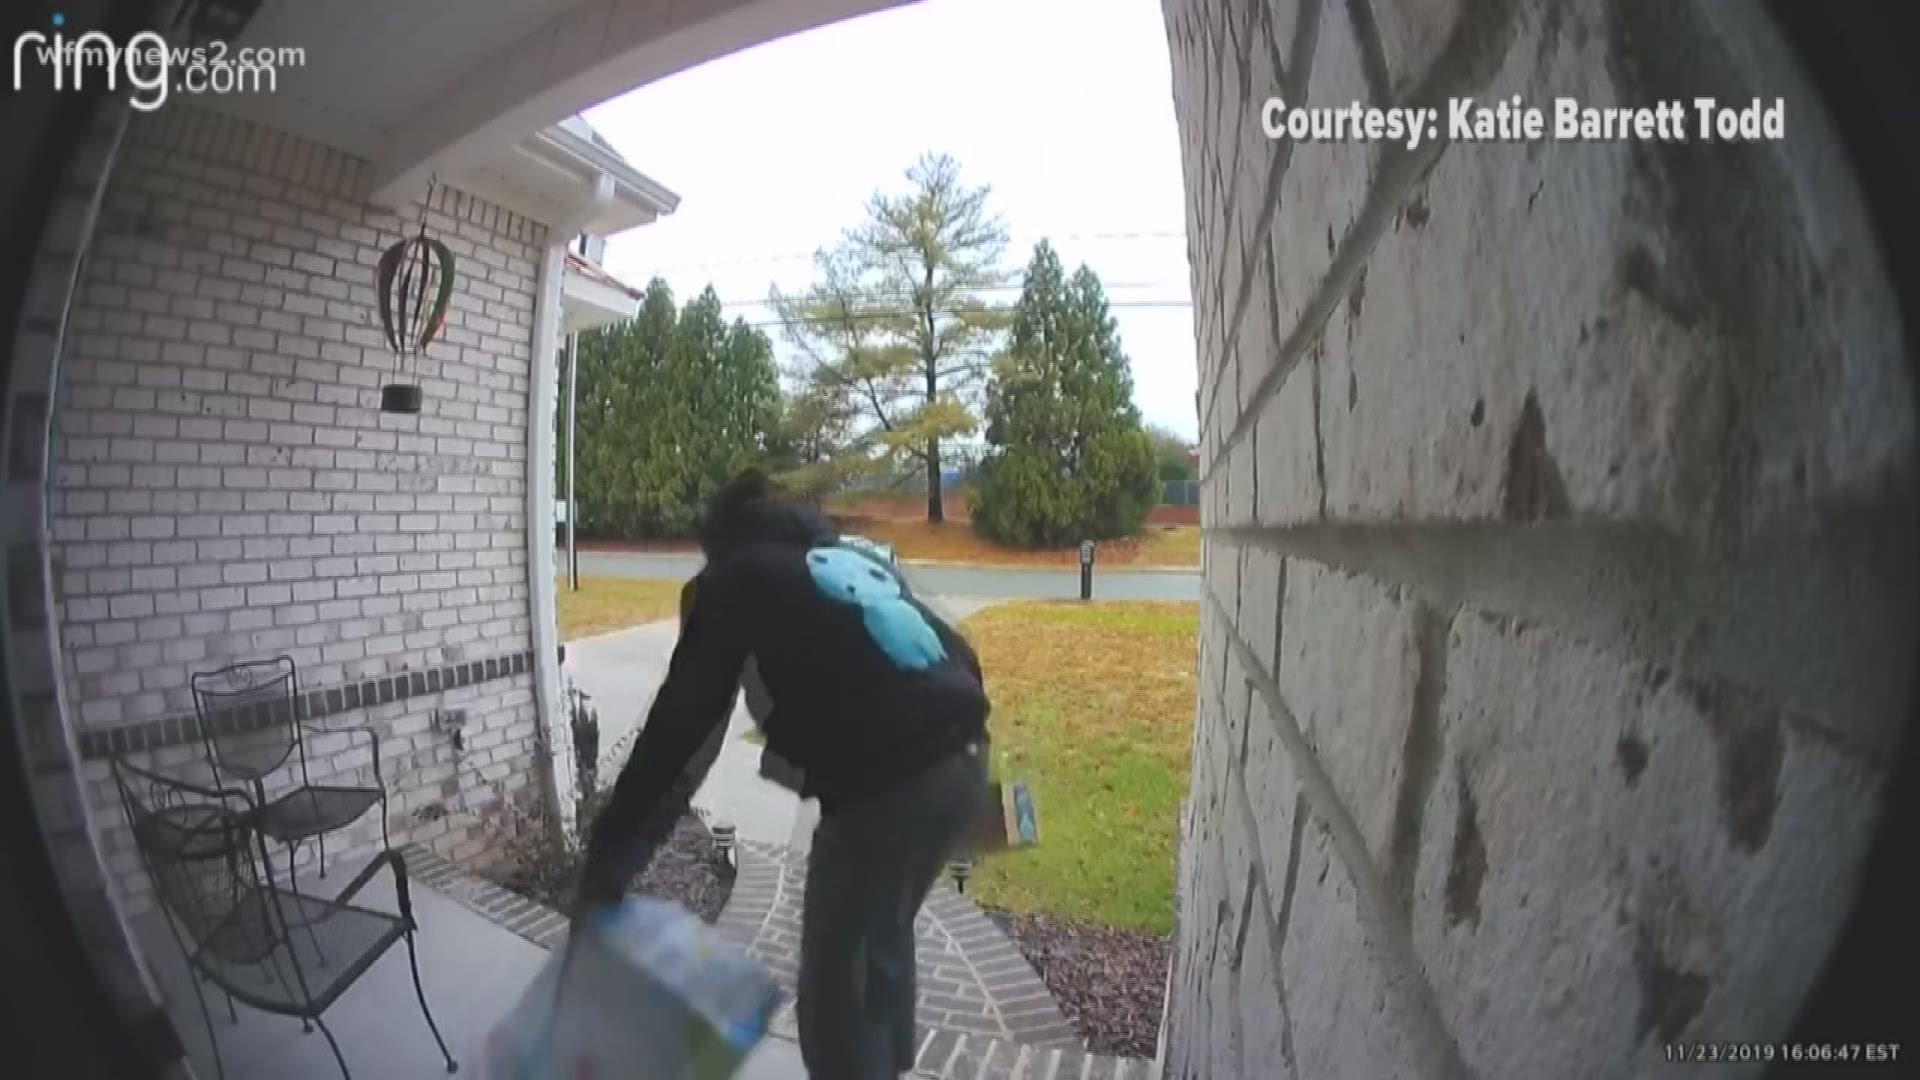 Greensboro Police recommends doing these three things to prevent porch theft.